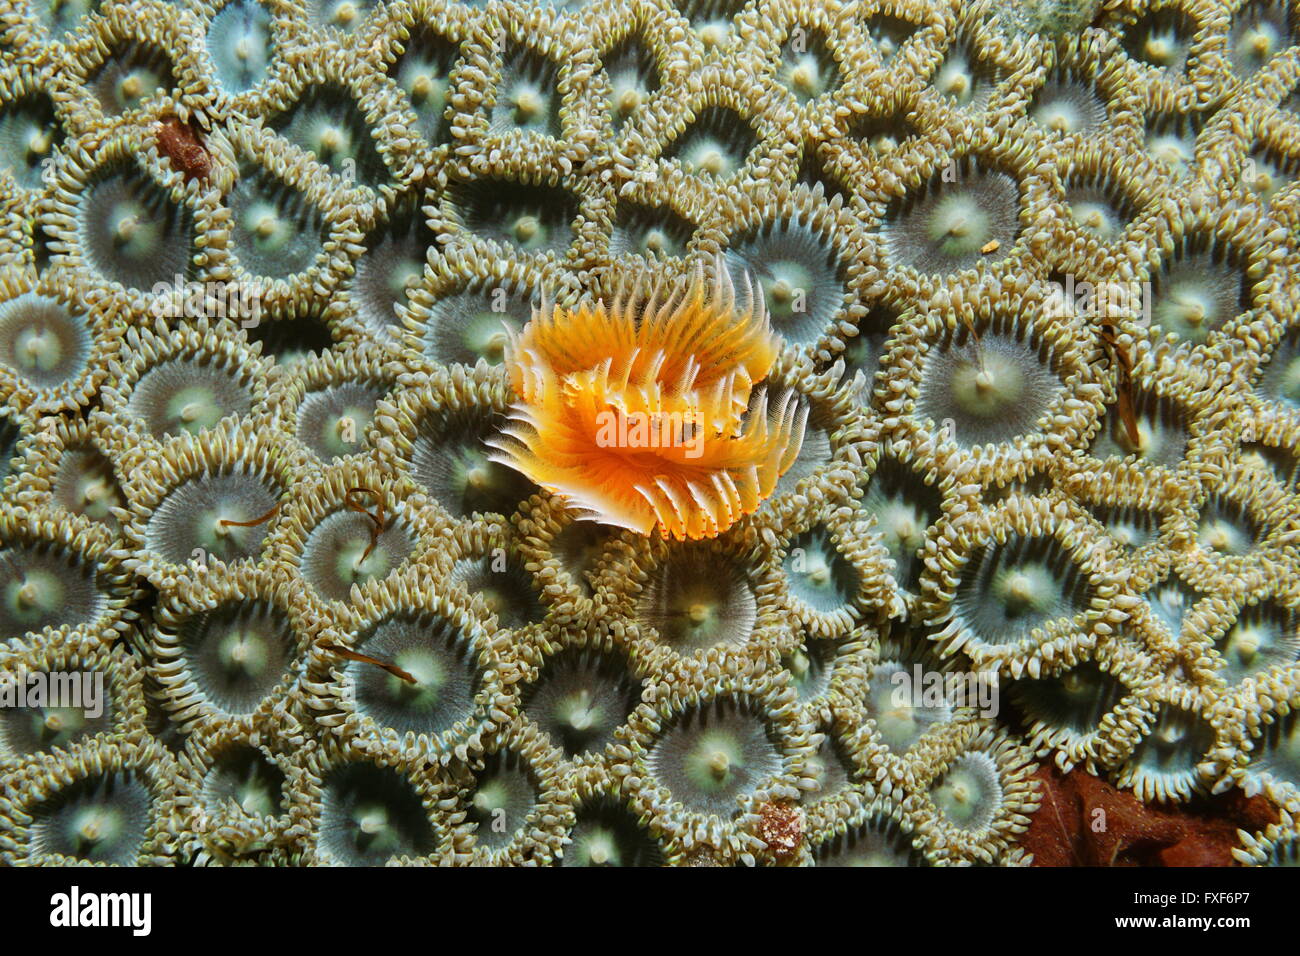 A red-spotted horseshoe worm surrounded by mat zoanthids, underwater marine life of the Caribbean sea Stock Photo